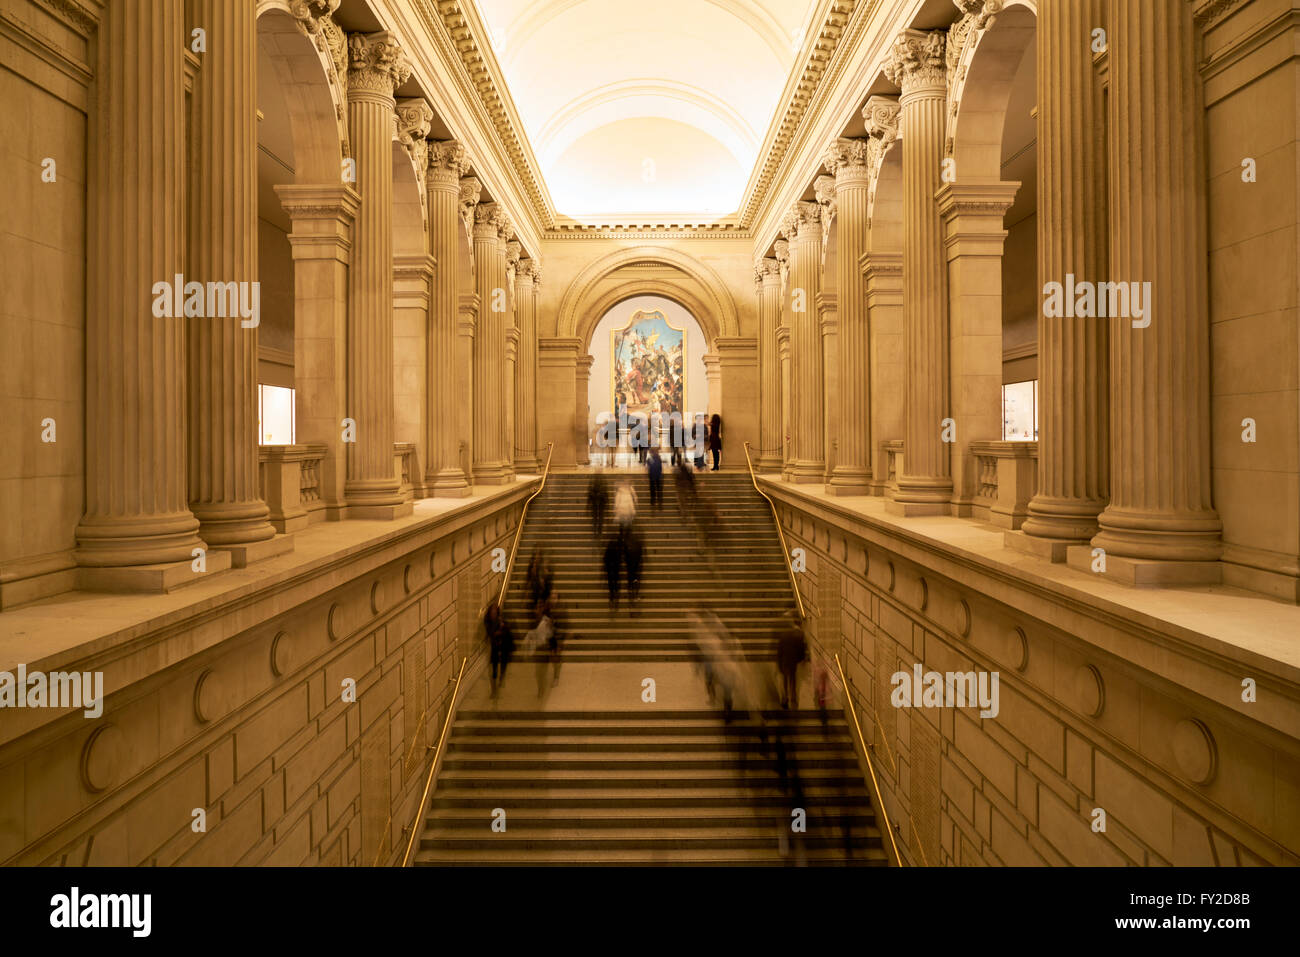 The main stairway entrance of the Metropolitan Museum of Art. New York Stock Photo